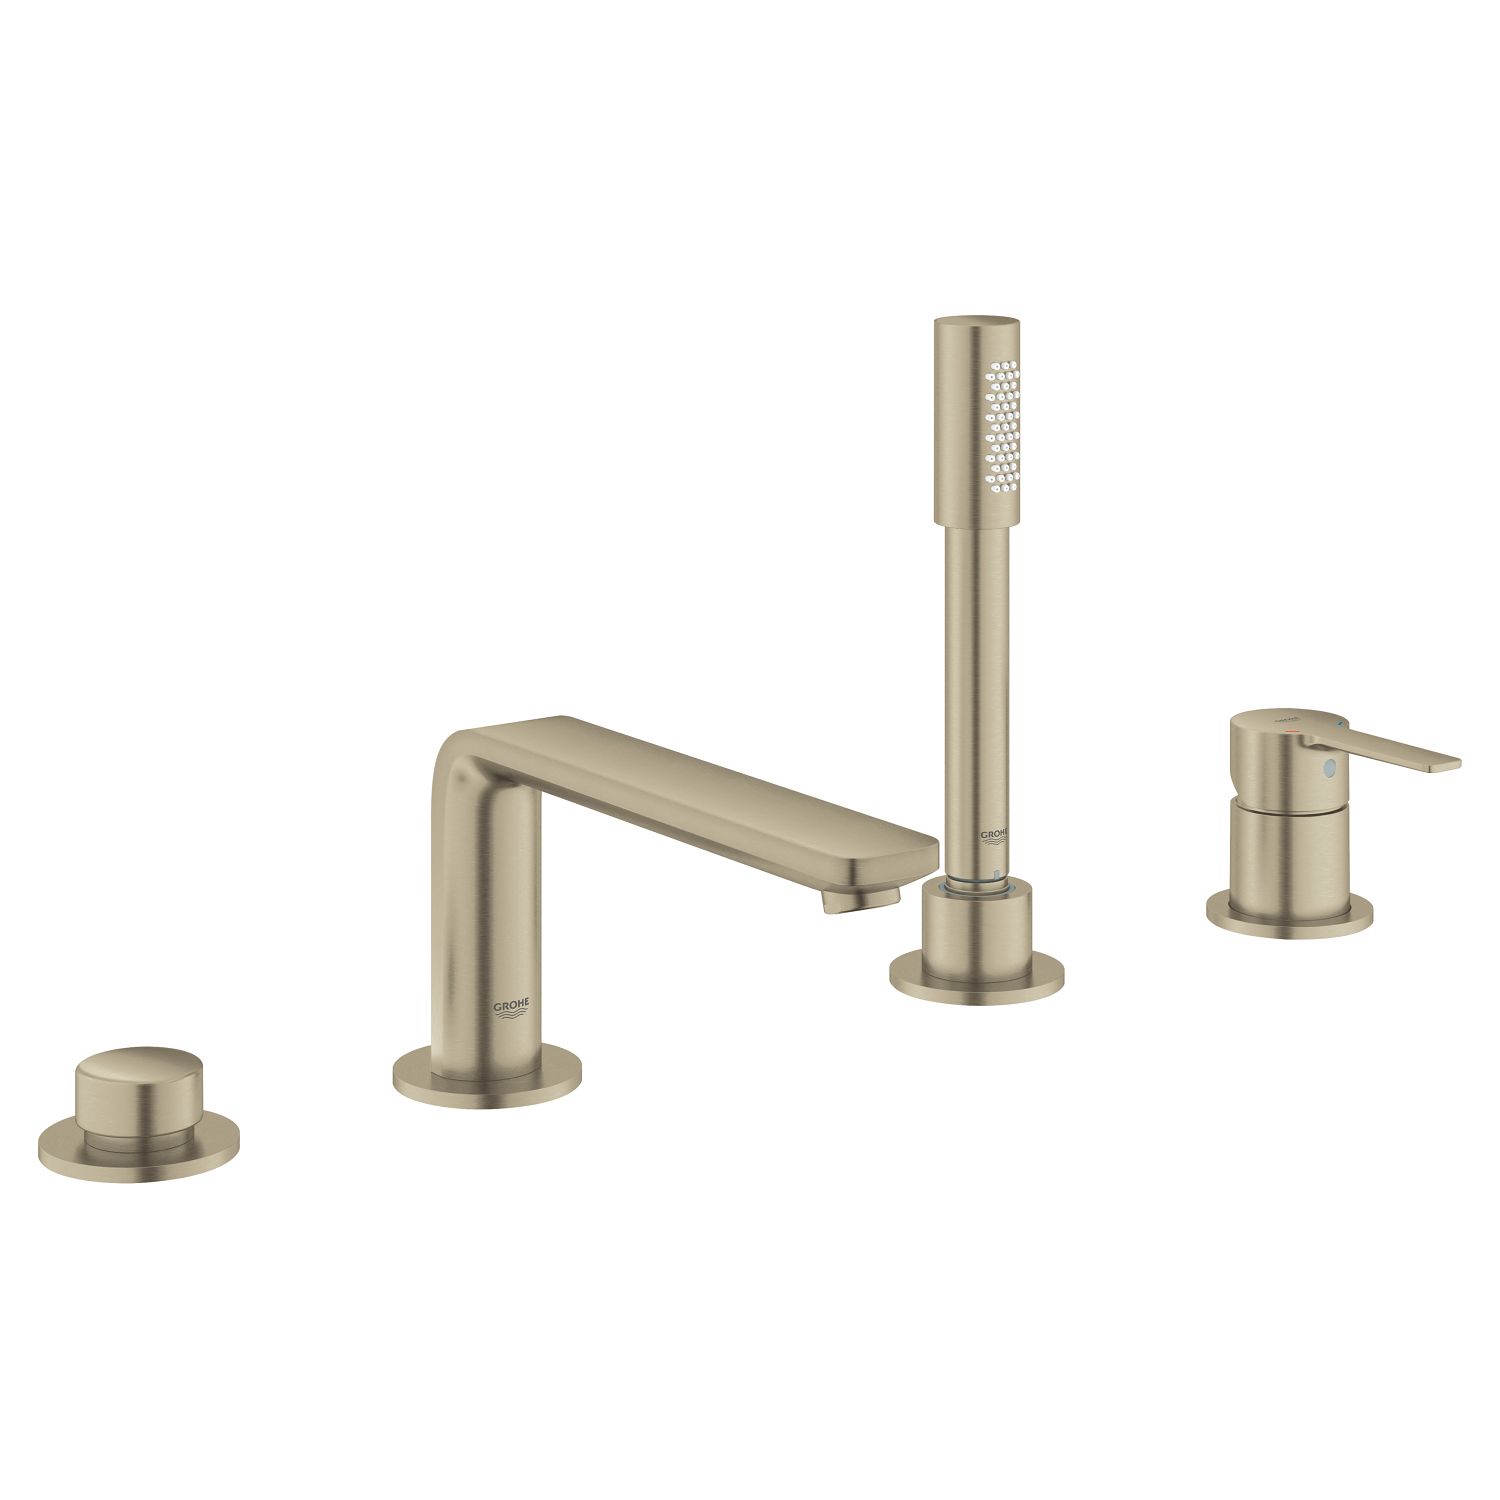 Lineare Deck Mounted Tub Faucet Plus Hand Shower In Brushed Nickel